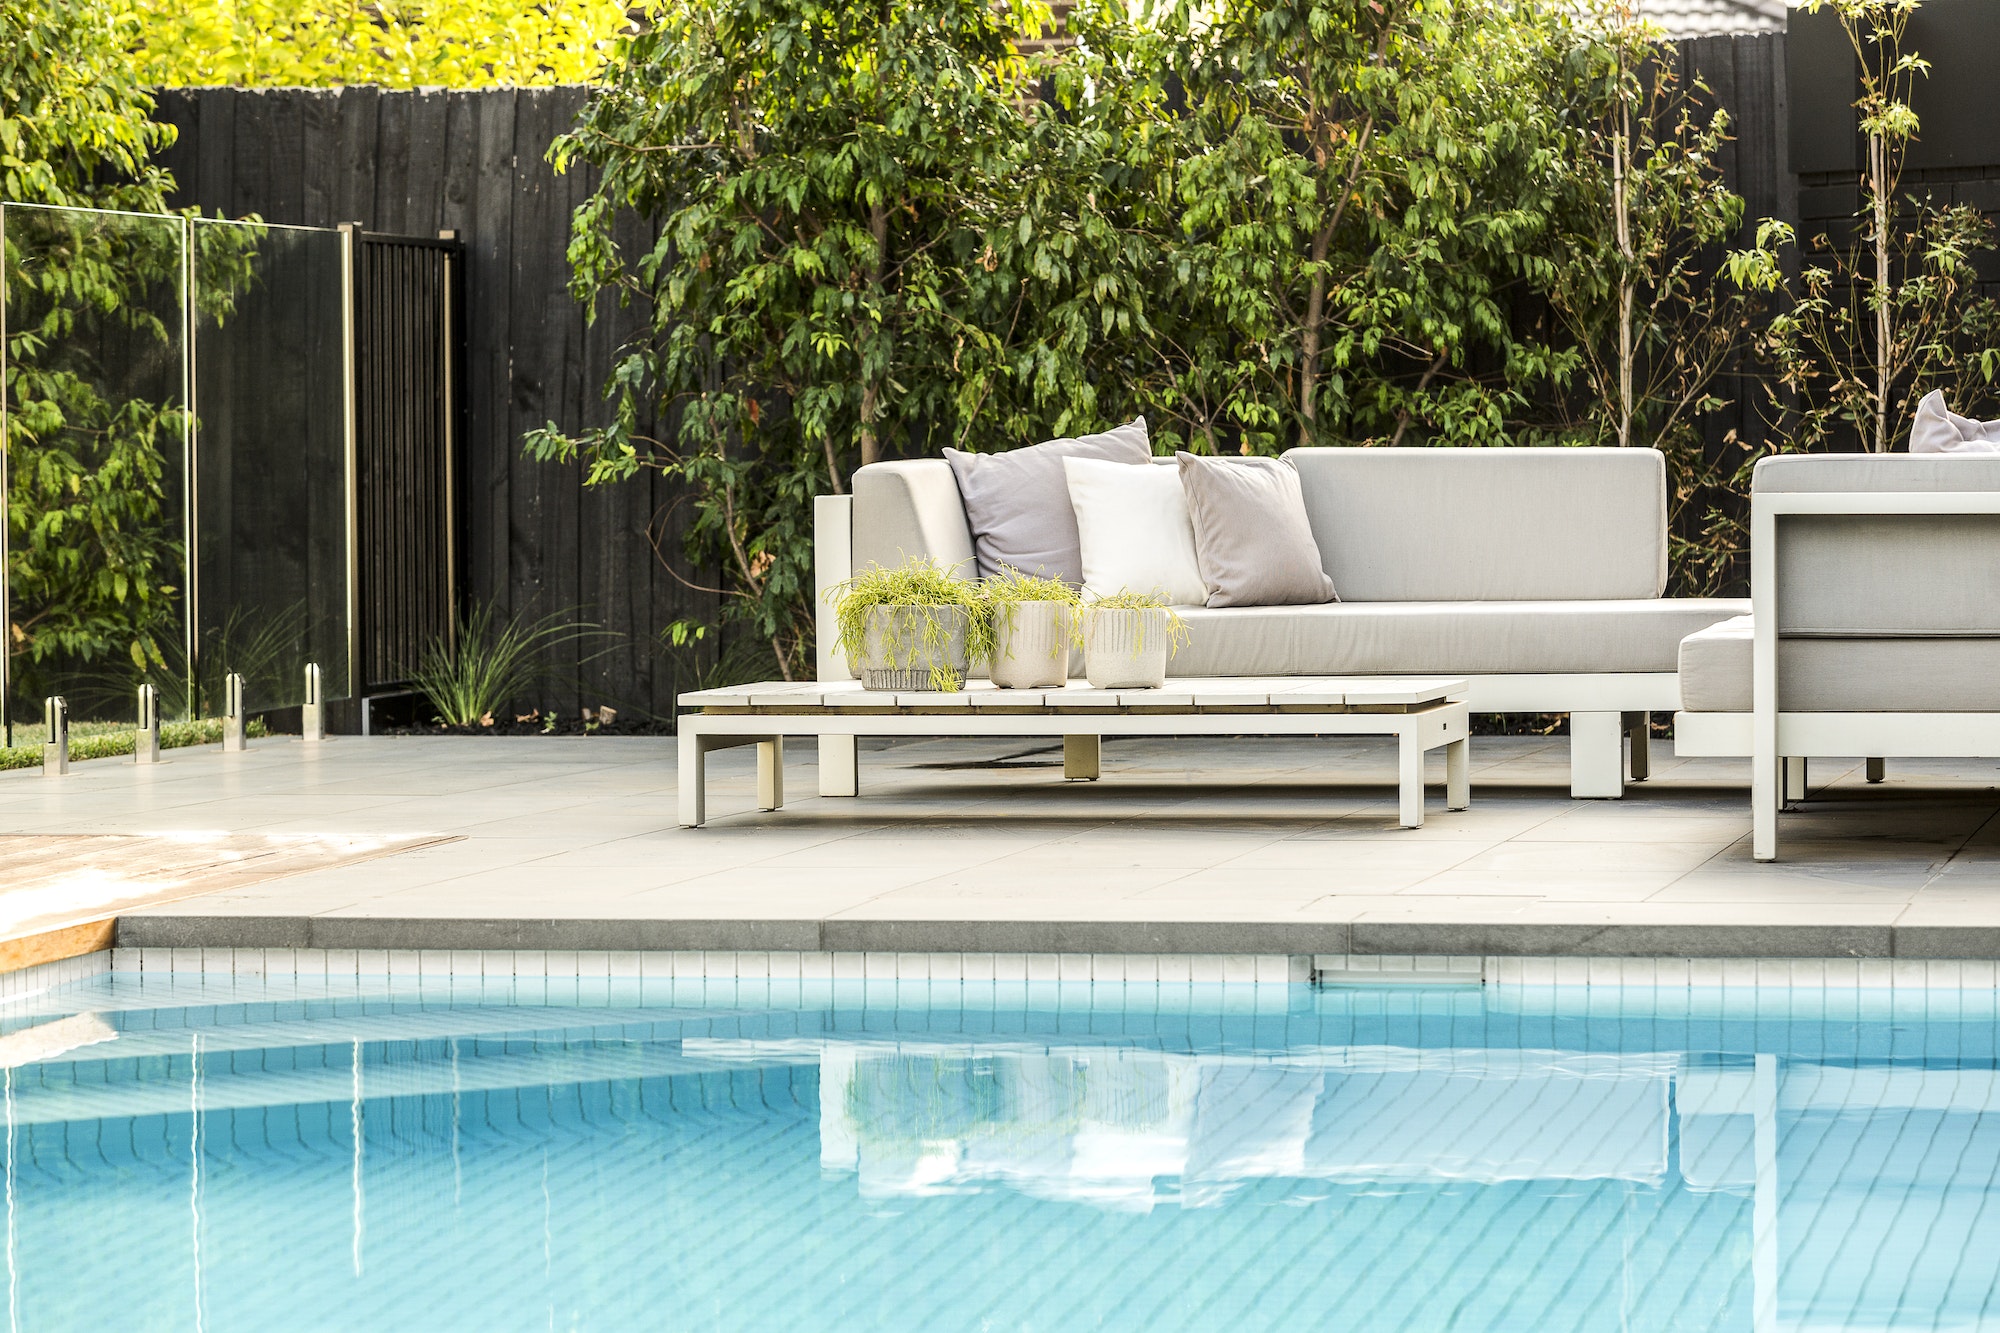 Revive Your Pool's Glory Without Draining Your Wallet in Just 7 Days - Guaranteed!